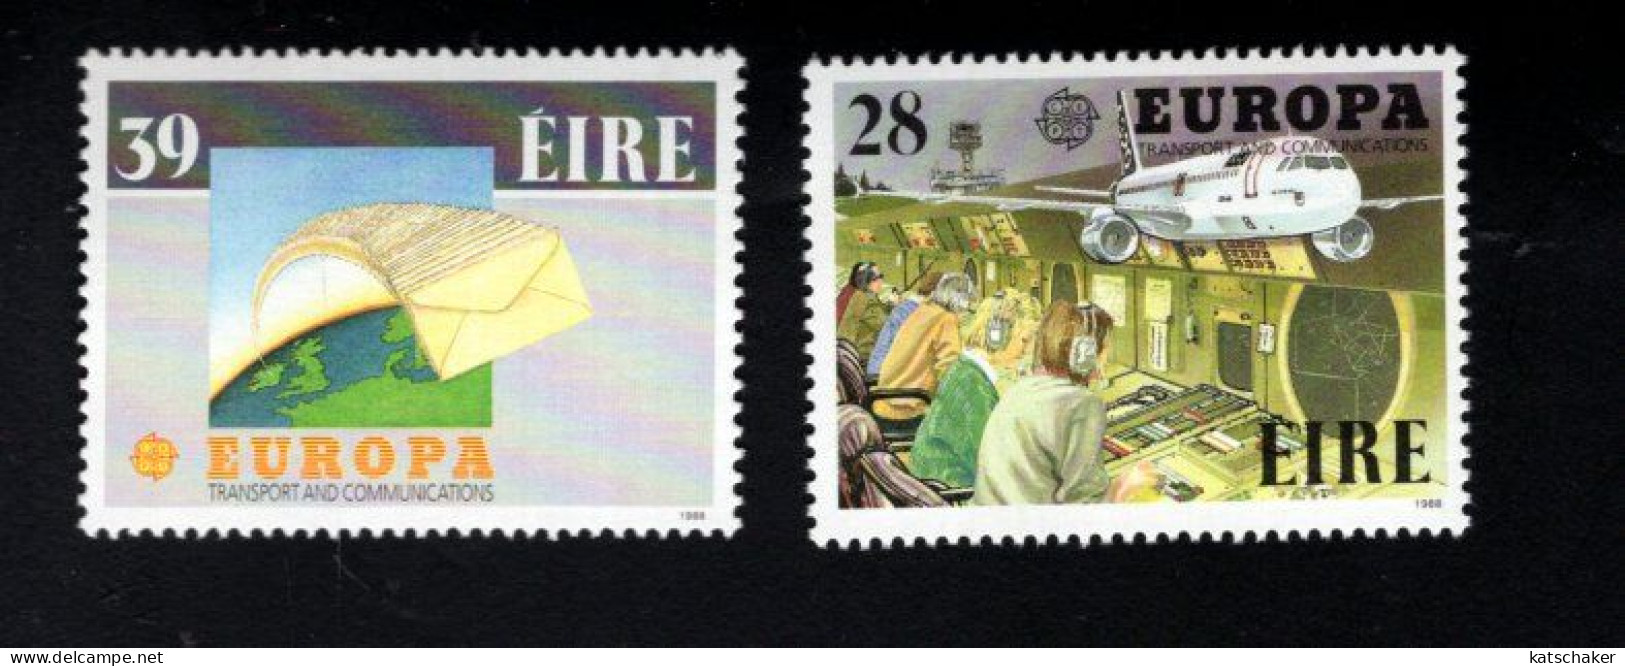 1997019473 1988  SCOTT 717 718 (XX) POSTFRIS  MINT NEVER HINGED - EUROPA ISSUE - AIRTRAFIC CONTROLLERS - EUROPE ON GLOBE - Nuovi